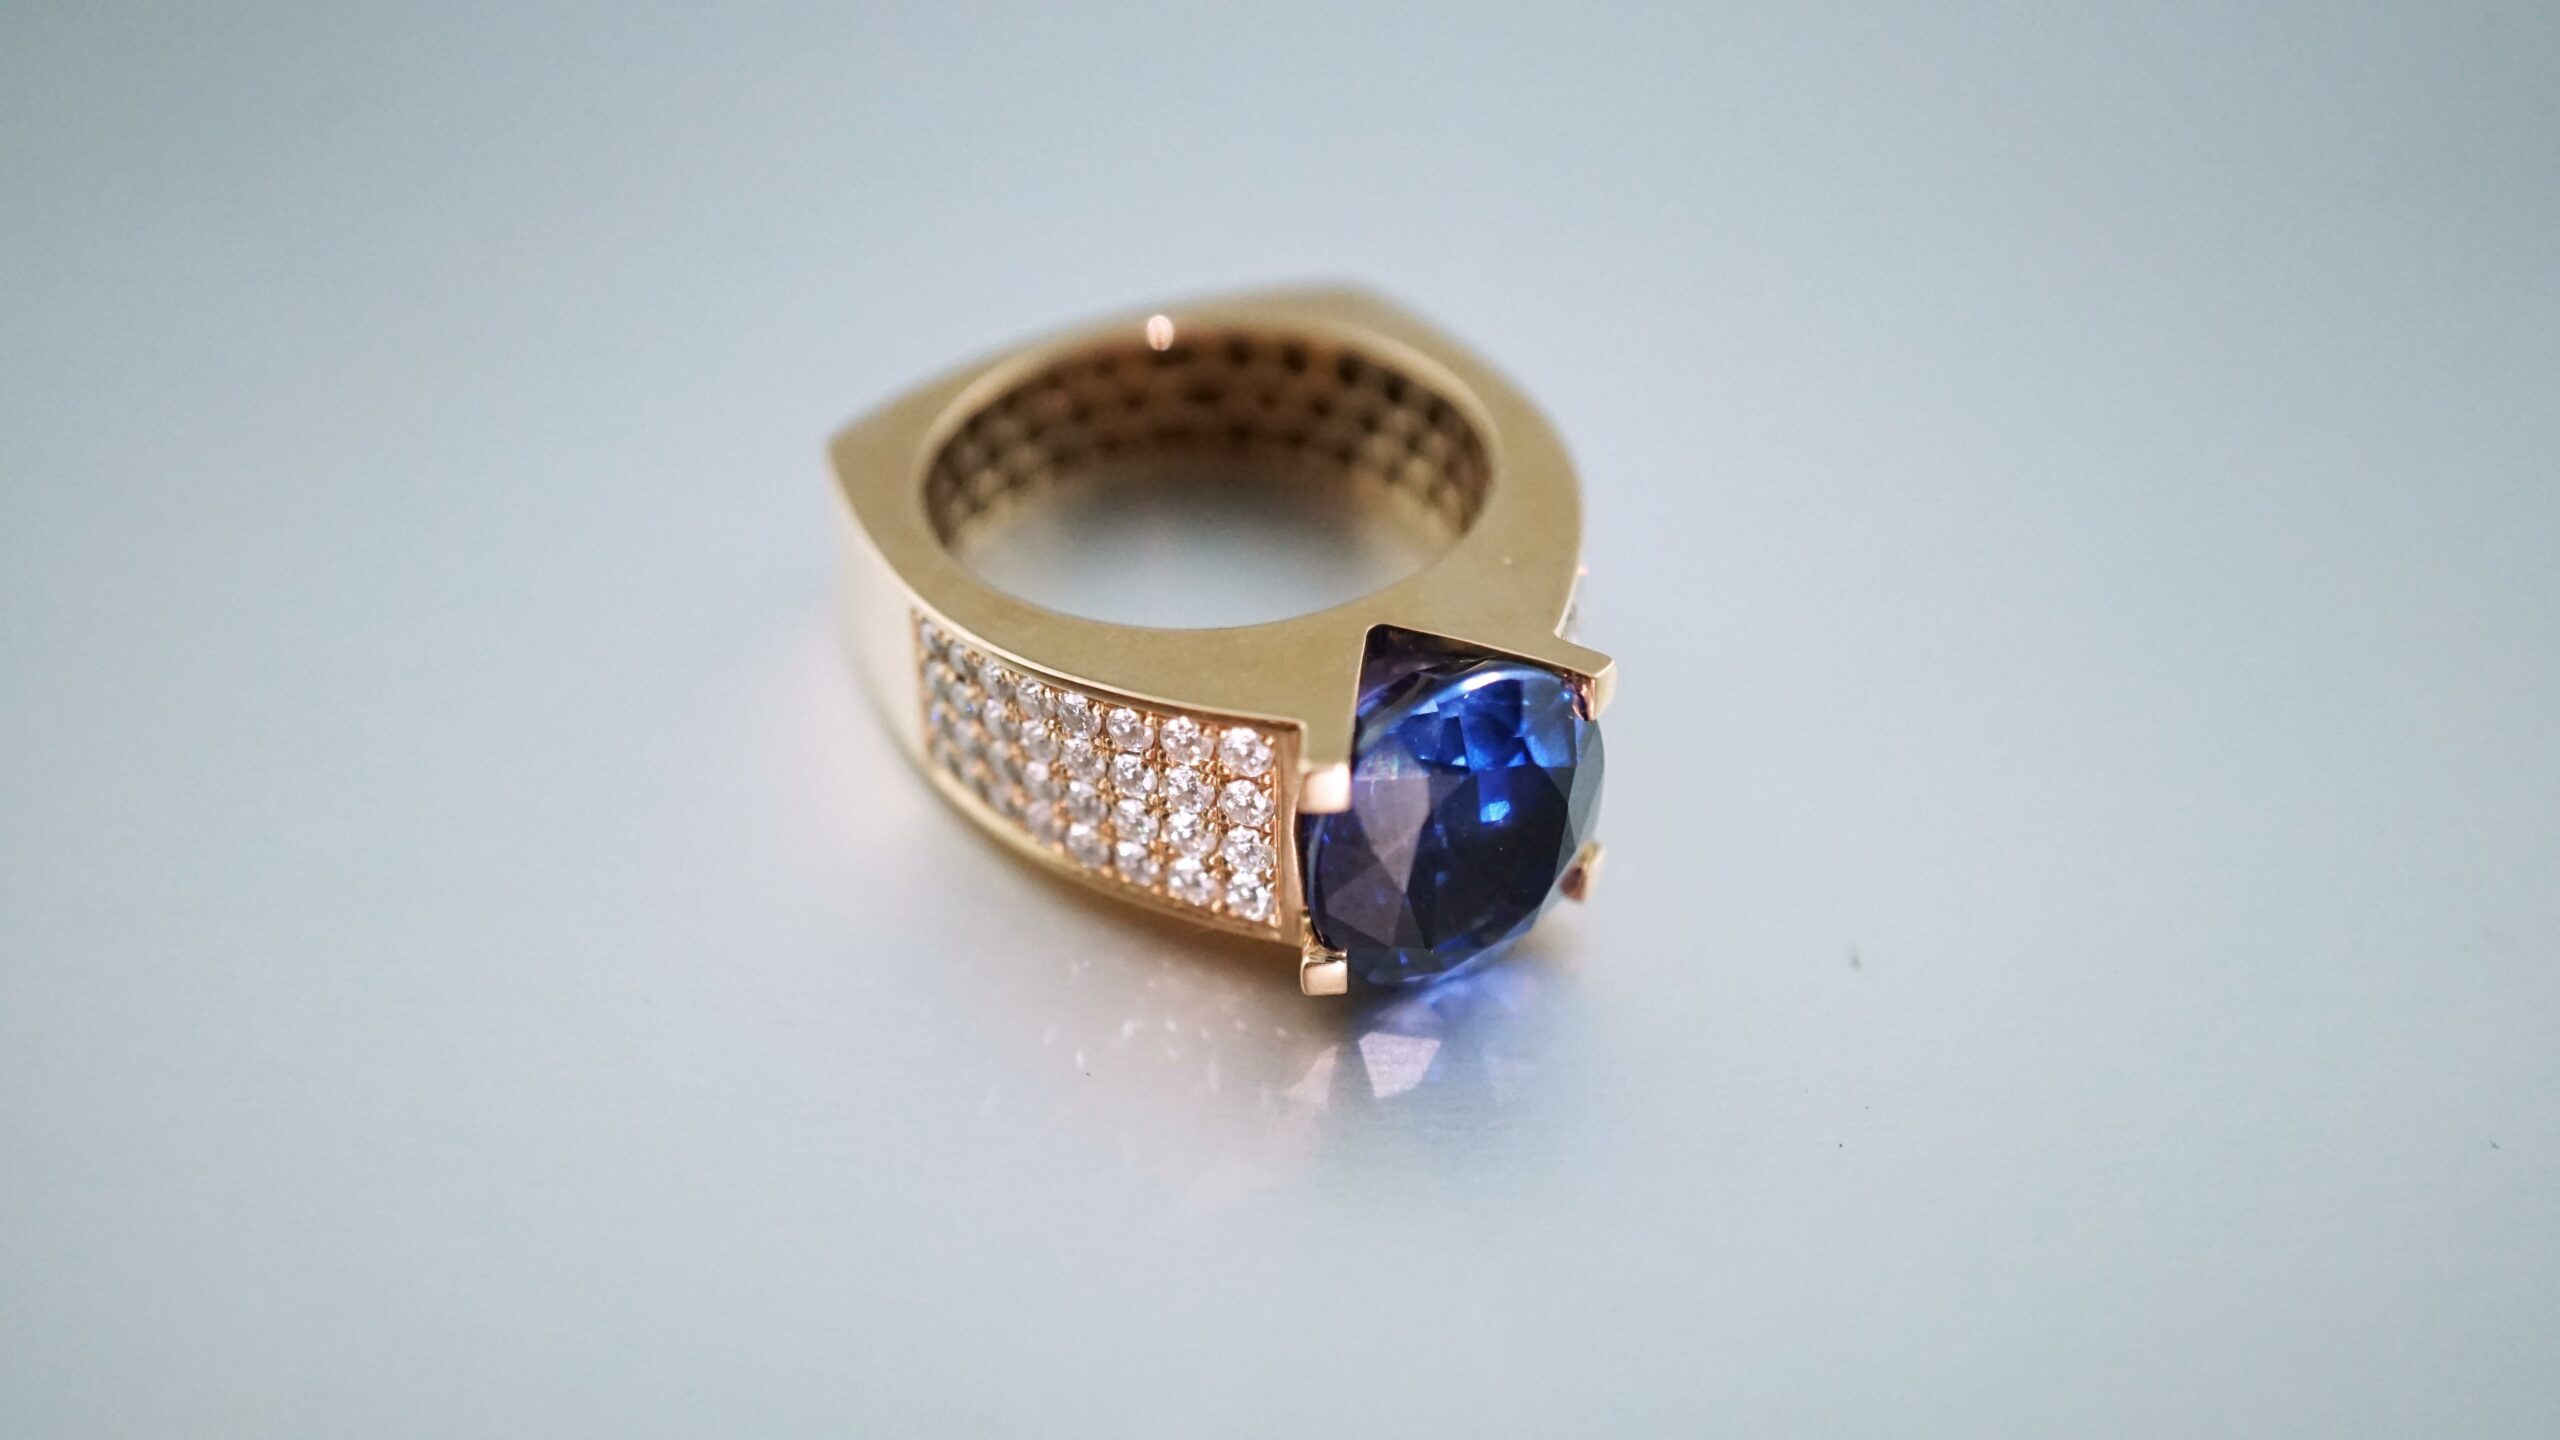 Blue Sapphire featured scaled